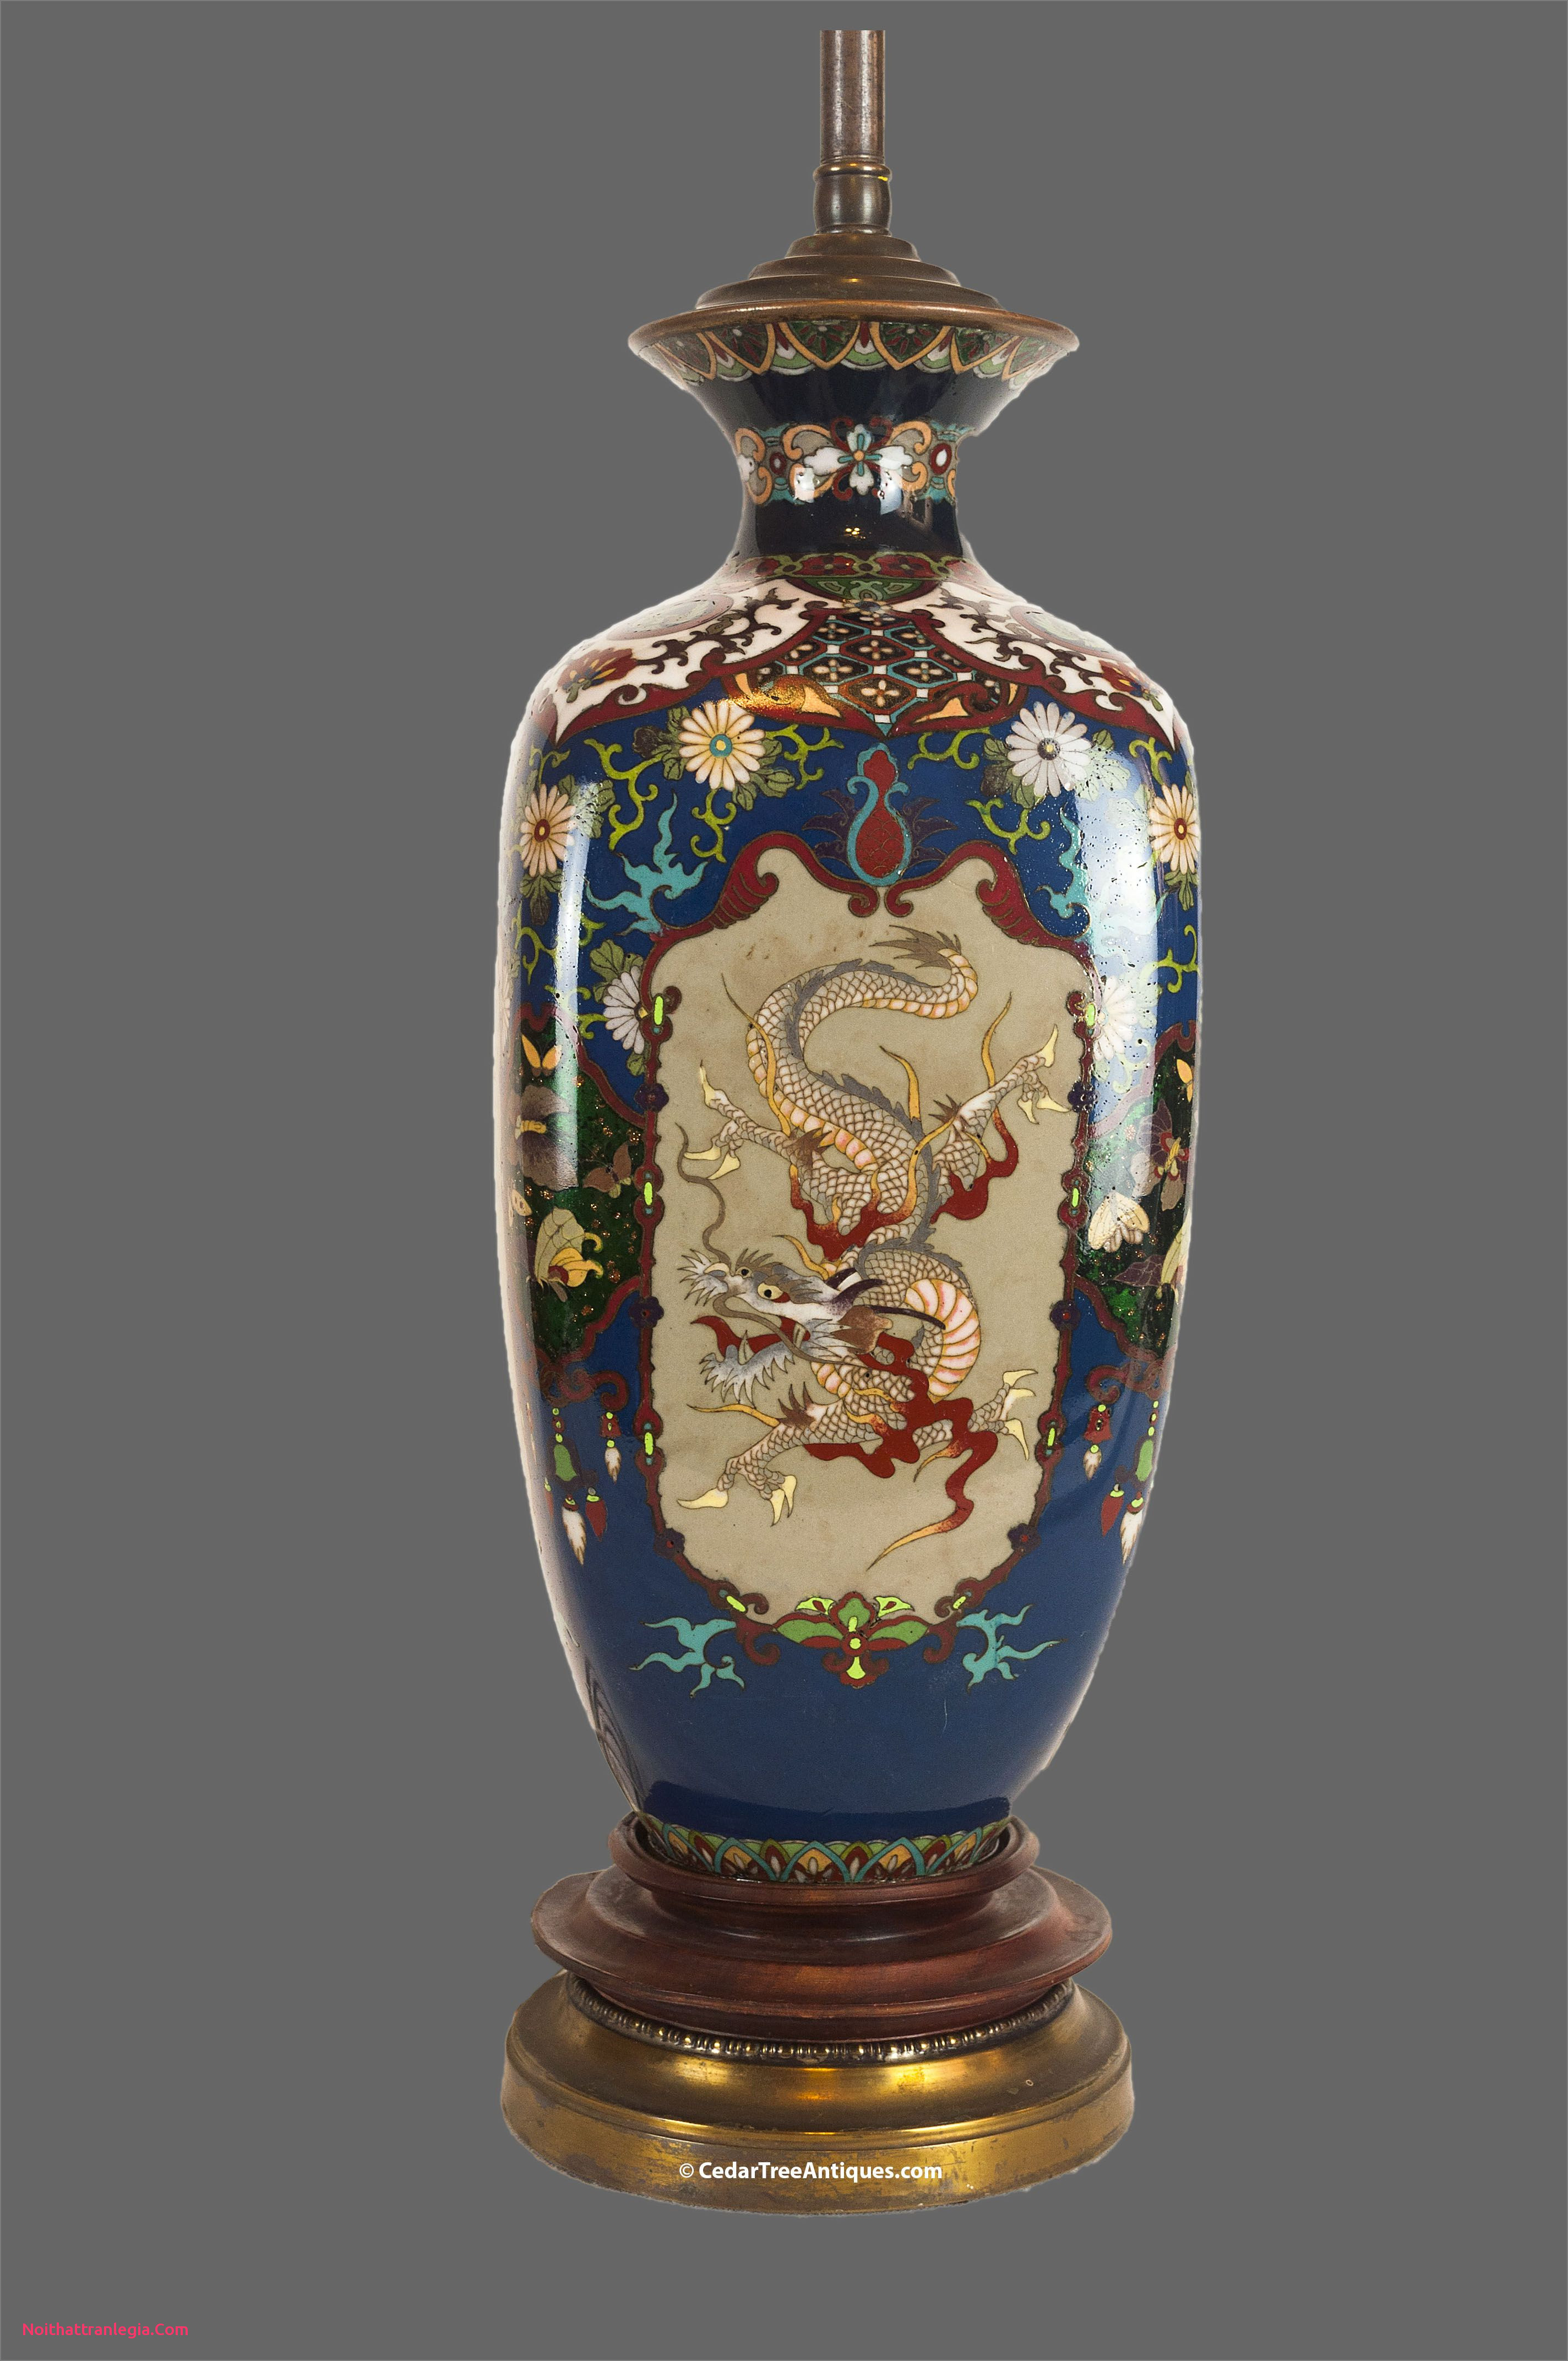 18 Spectacular Old Blue Glass Vases 2024 free download old blue glass vases of 20 chinese antique vase noithattranlegia vases design pertaining to japanese meiji period cloissone dragon vase mounted as a lamp